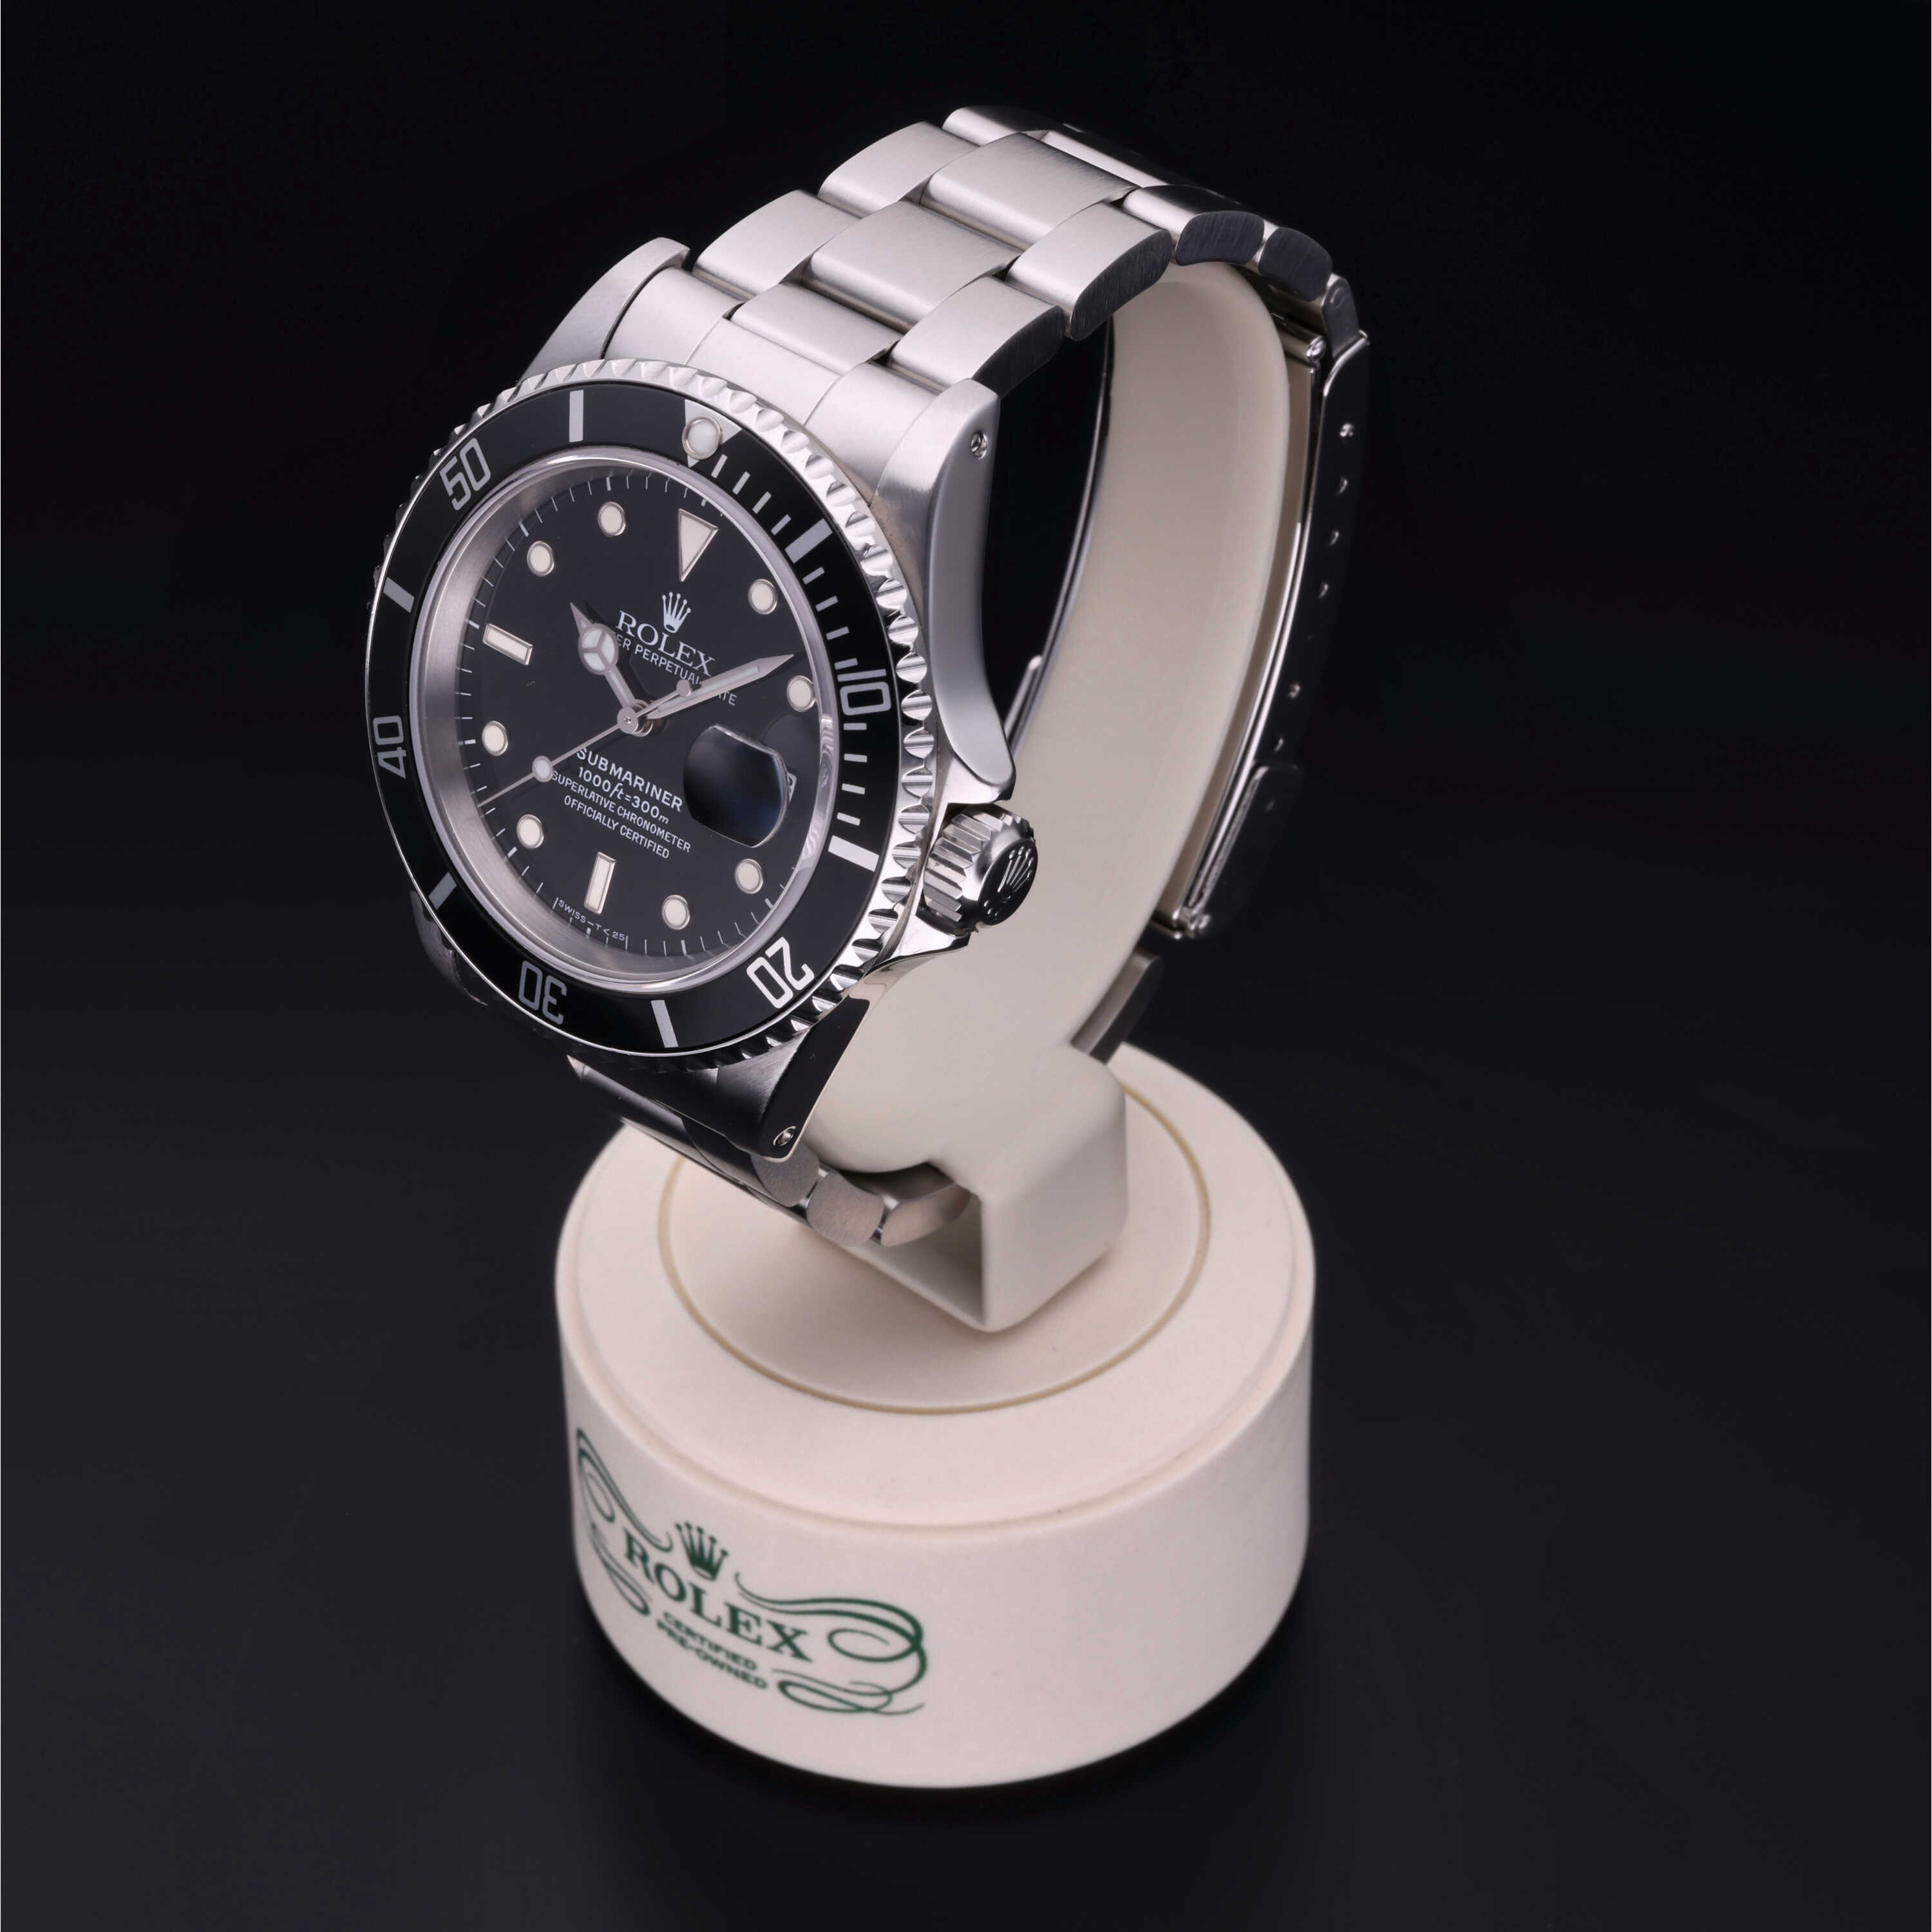 Rolex Certified Pre-Owned Submariner 40 mm in Oystersteel, 16610LN ...